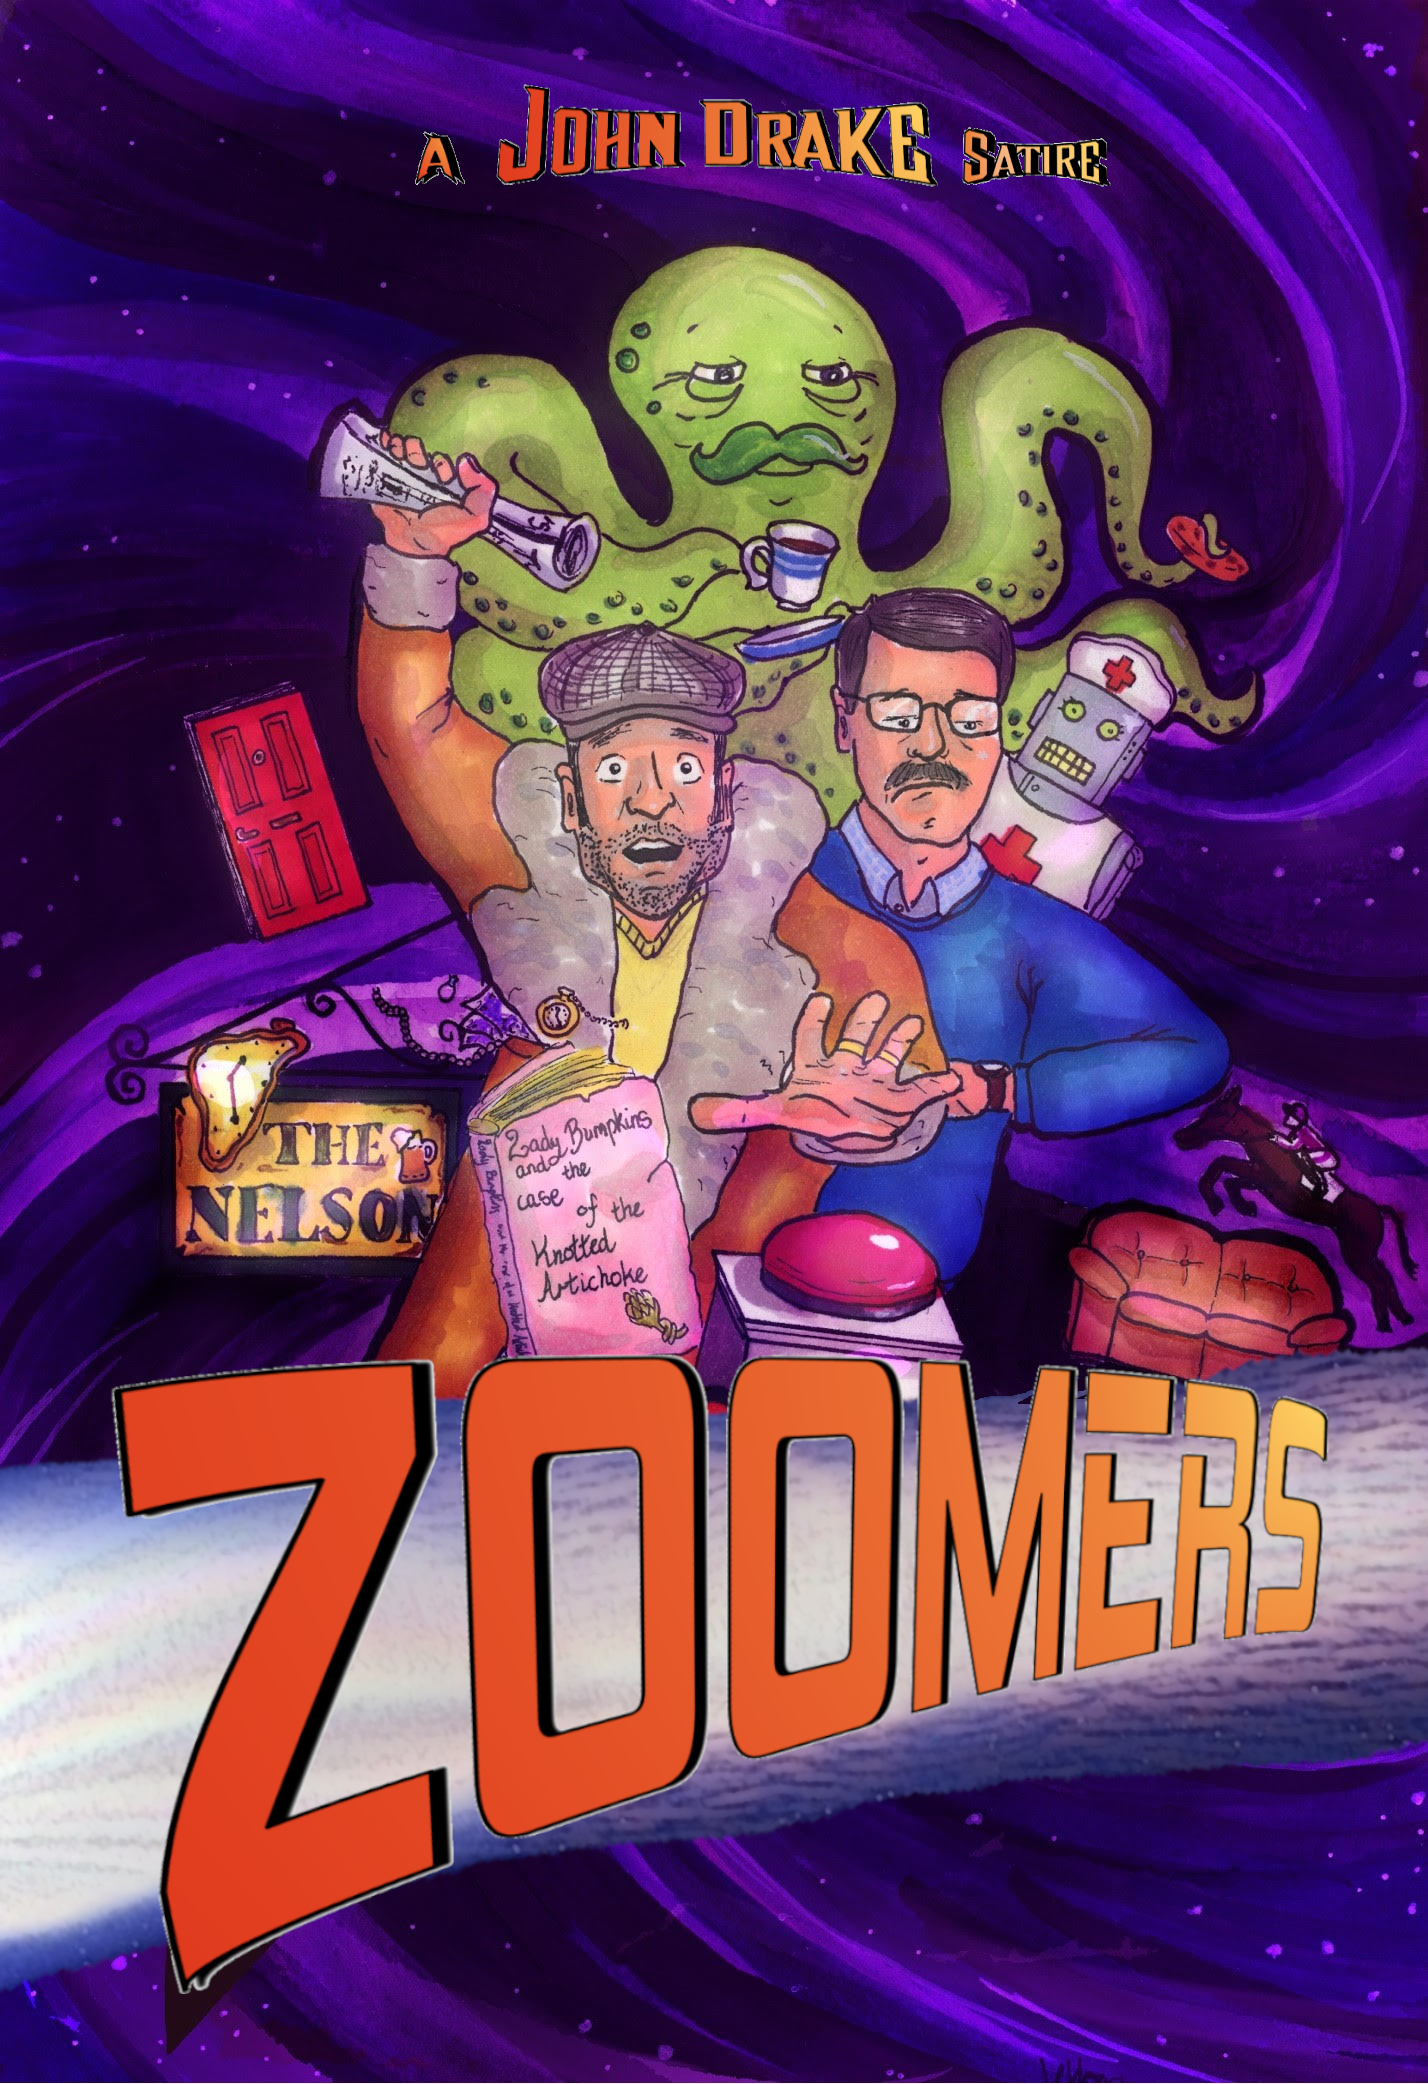 Zoomers by John Drake now available in Hardback